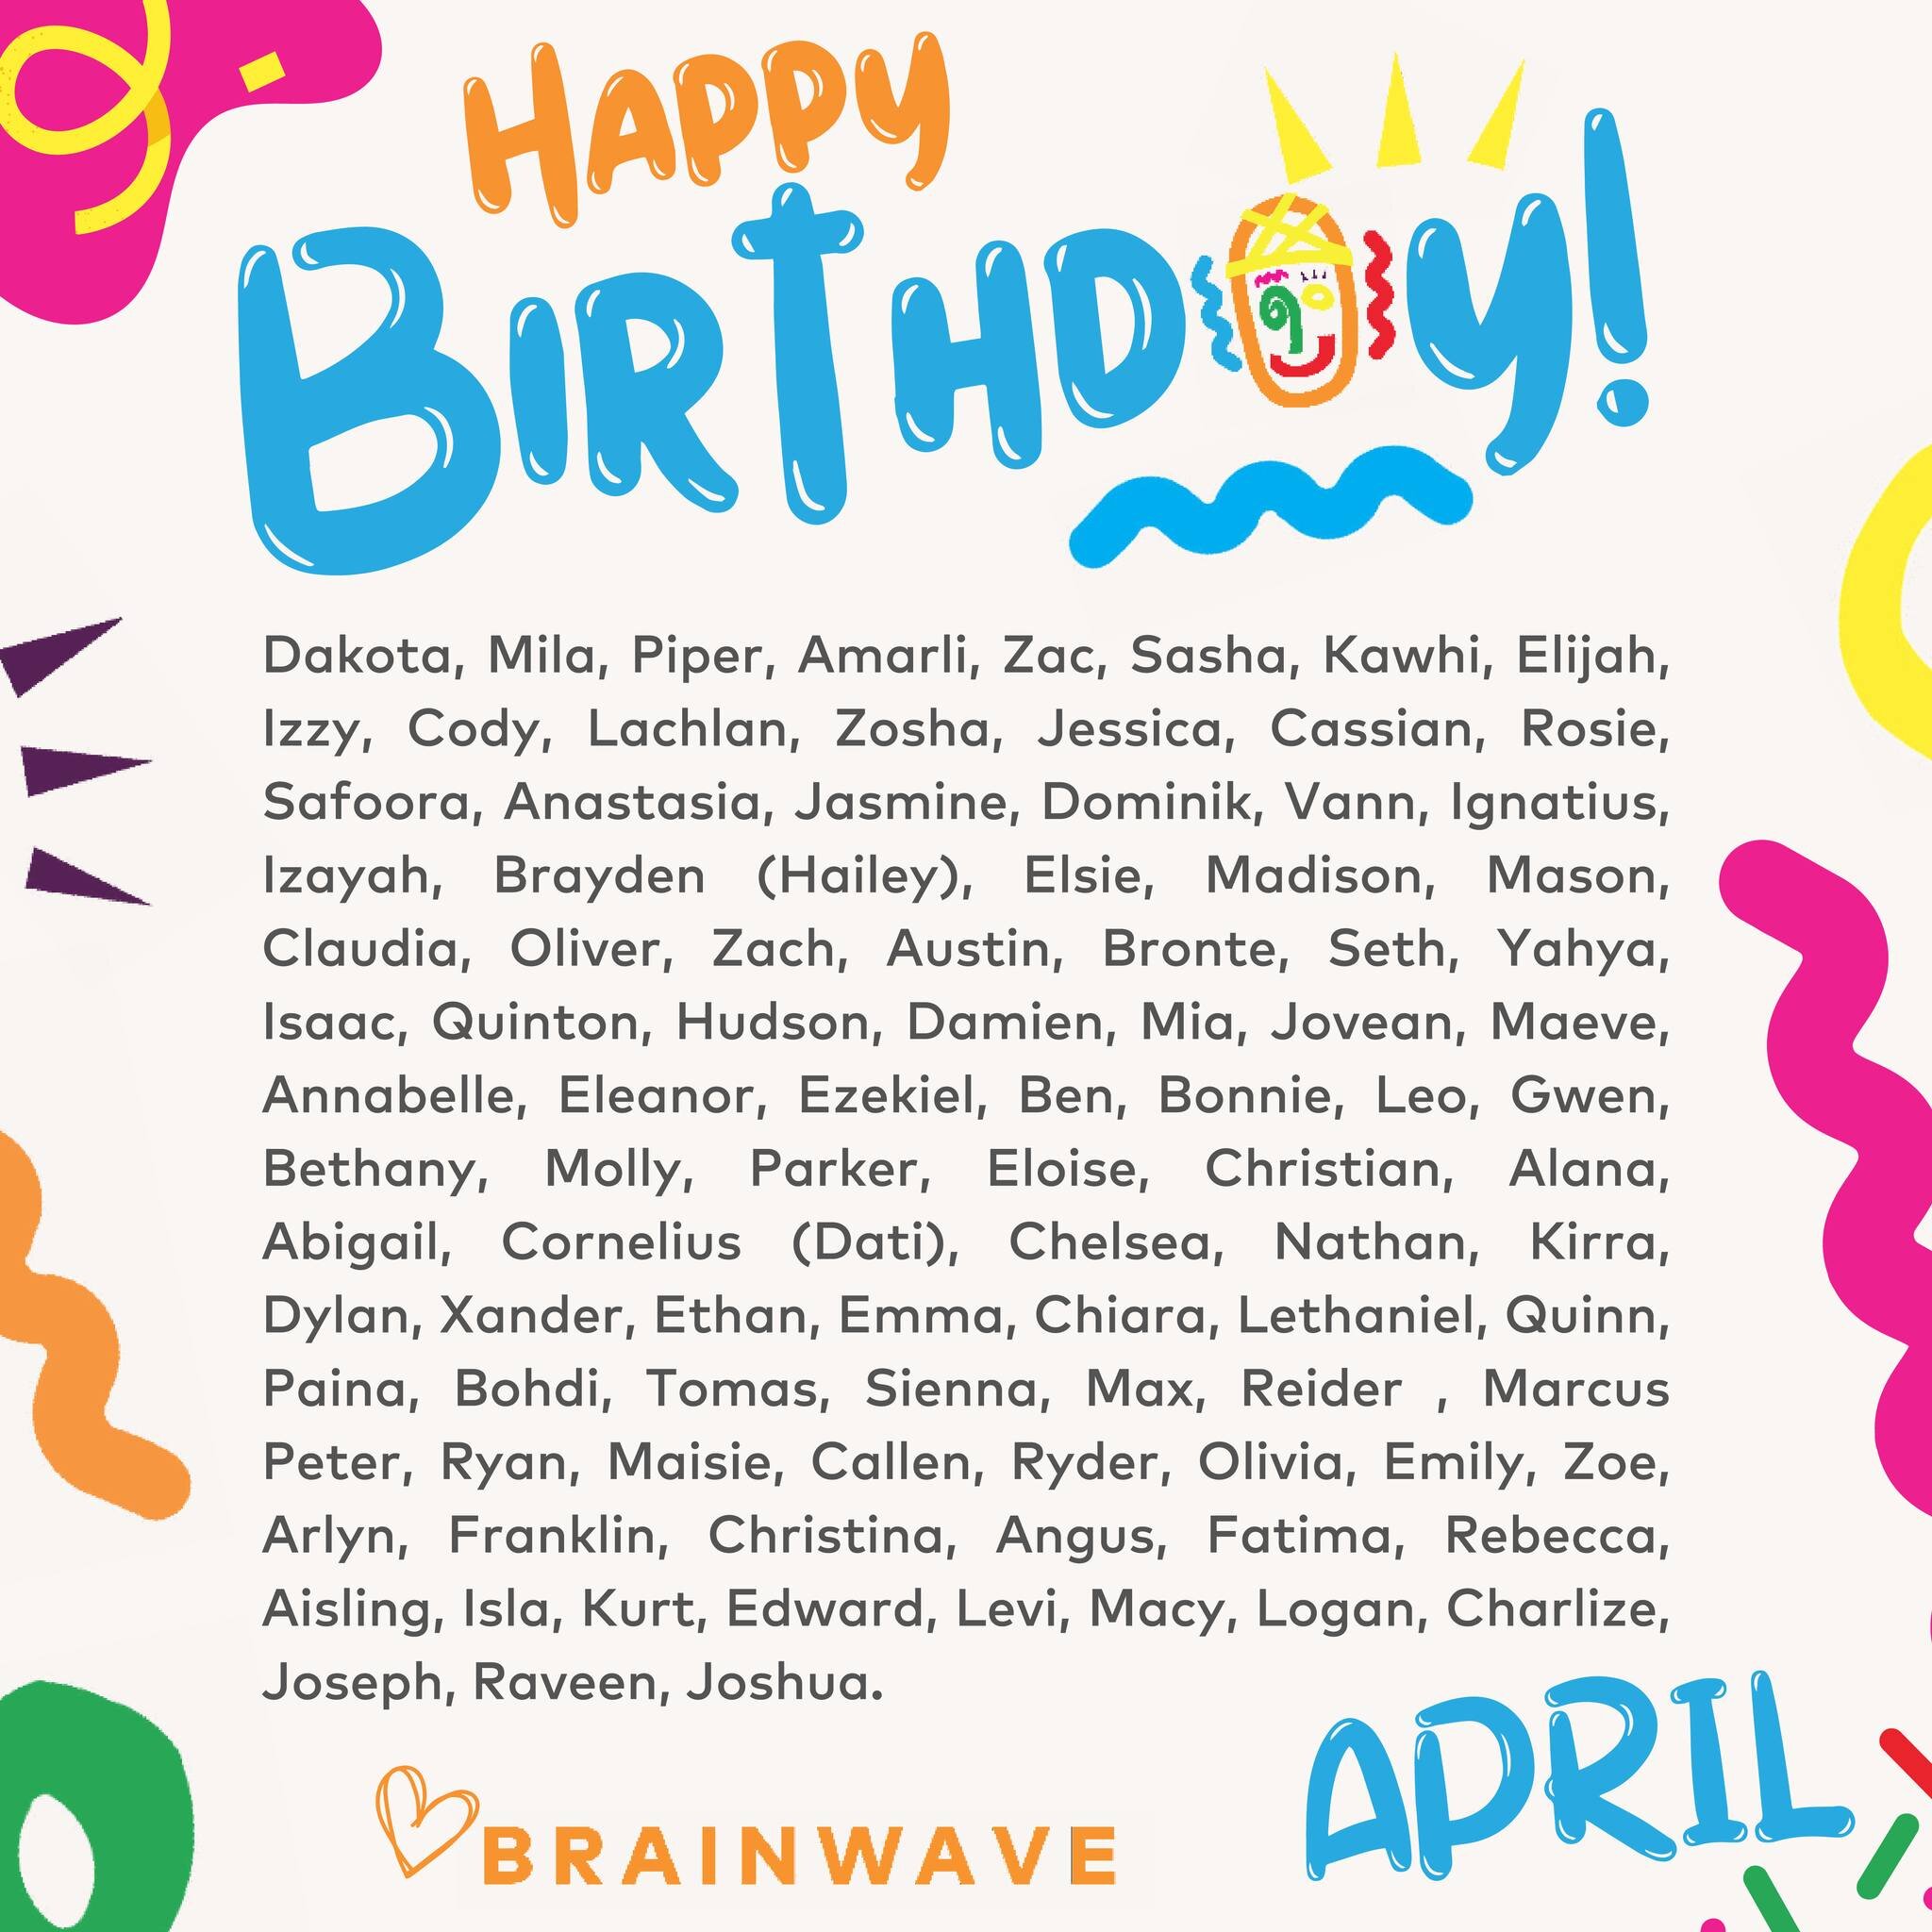 Hip, hip, hooray! 🥳🥳 It's your birthday! We are sending lots of love to all our Brainwave children celebrating birthdays in April! 😁
#happybirthday #brainwaveaus #brainwave #brainwaveaustralia #brainwavefamily